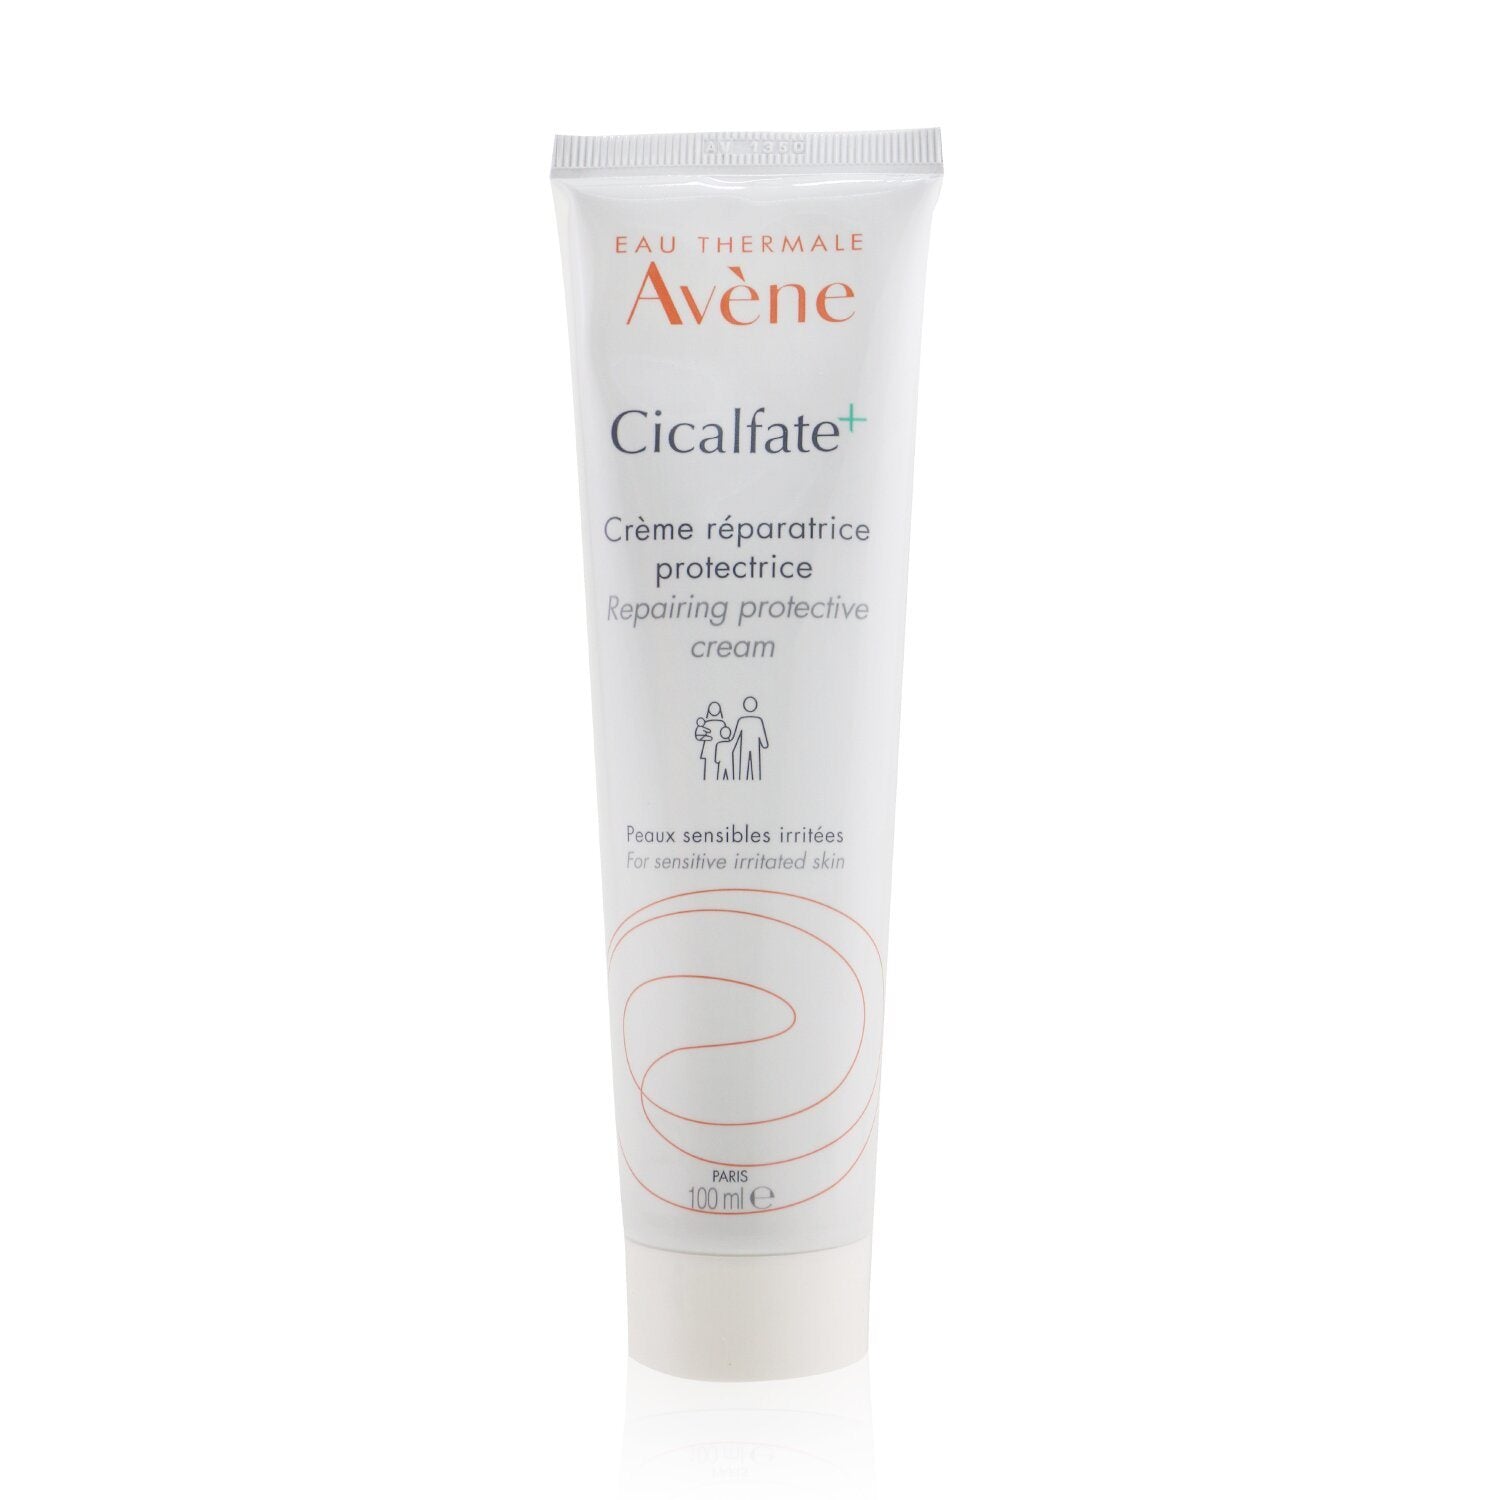 A tube of Cicalfate+ Repairing Protective Cream on a white background, promoting skin recovery and hydration levels.